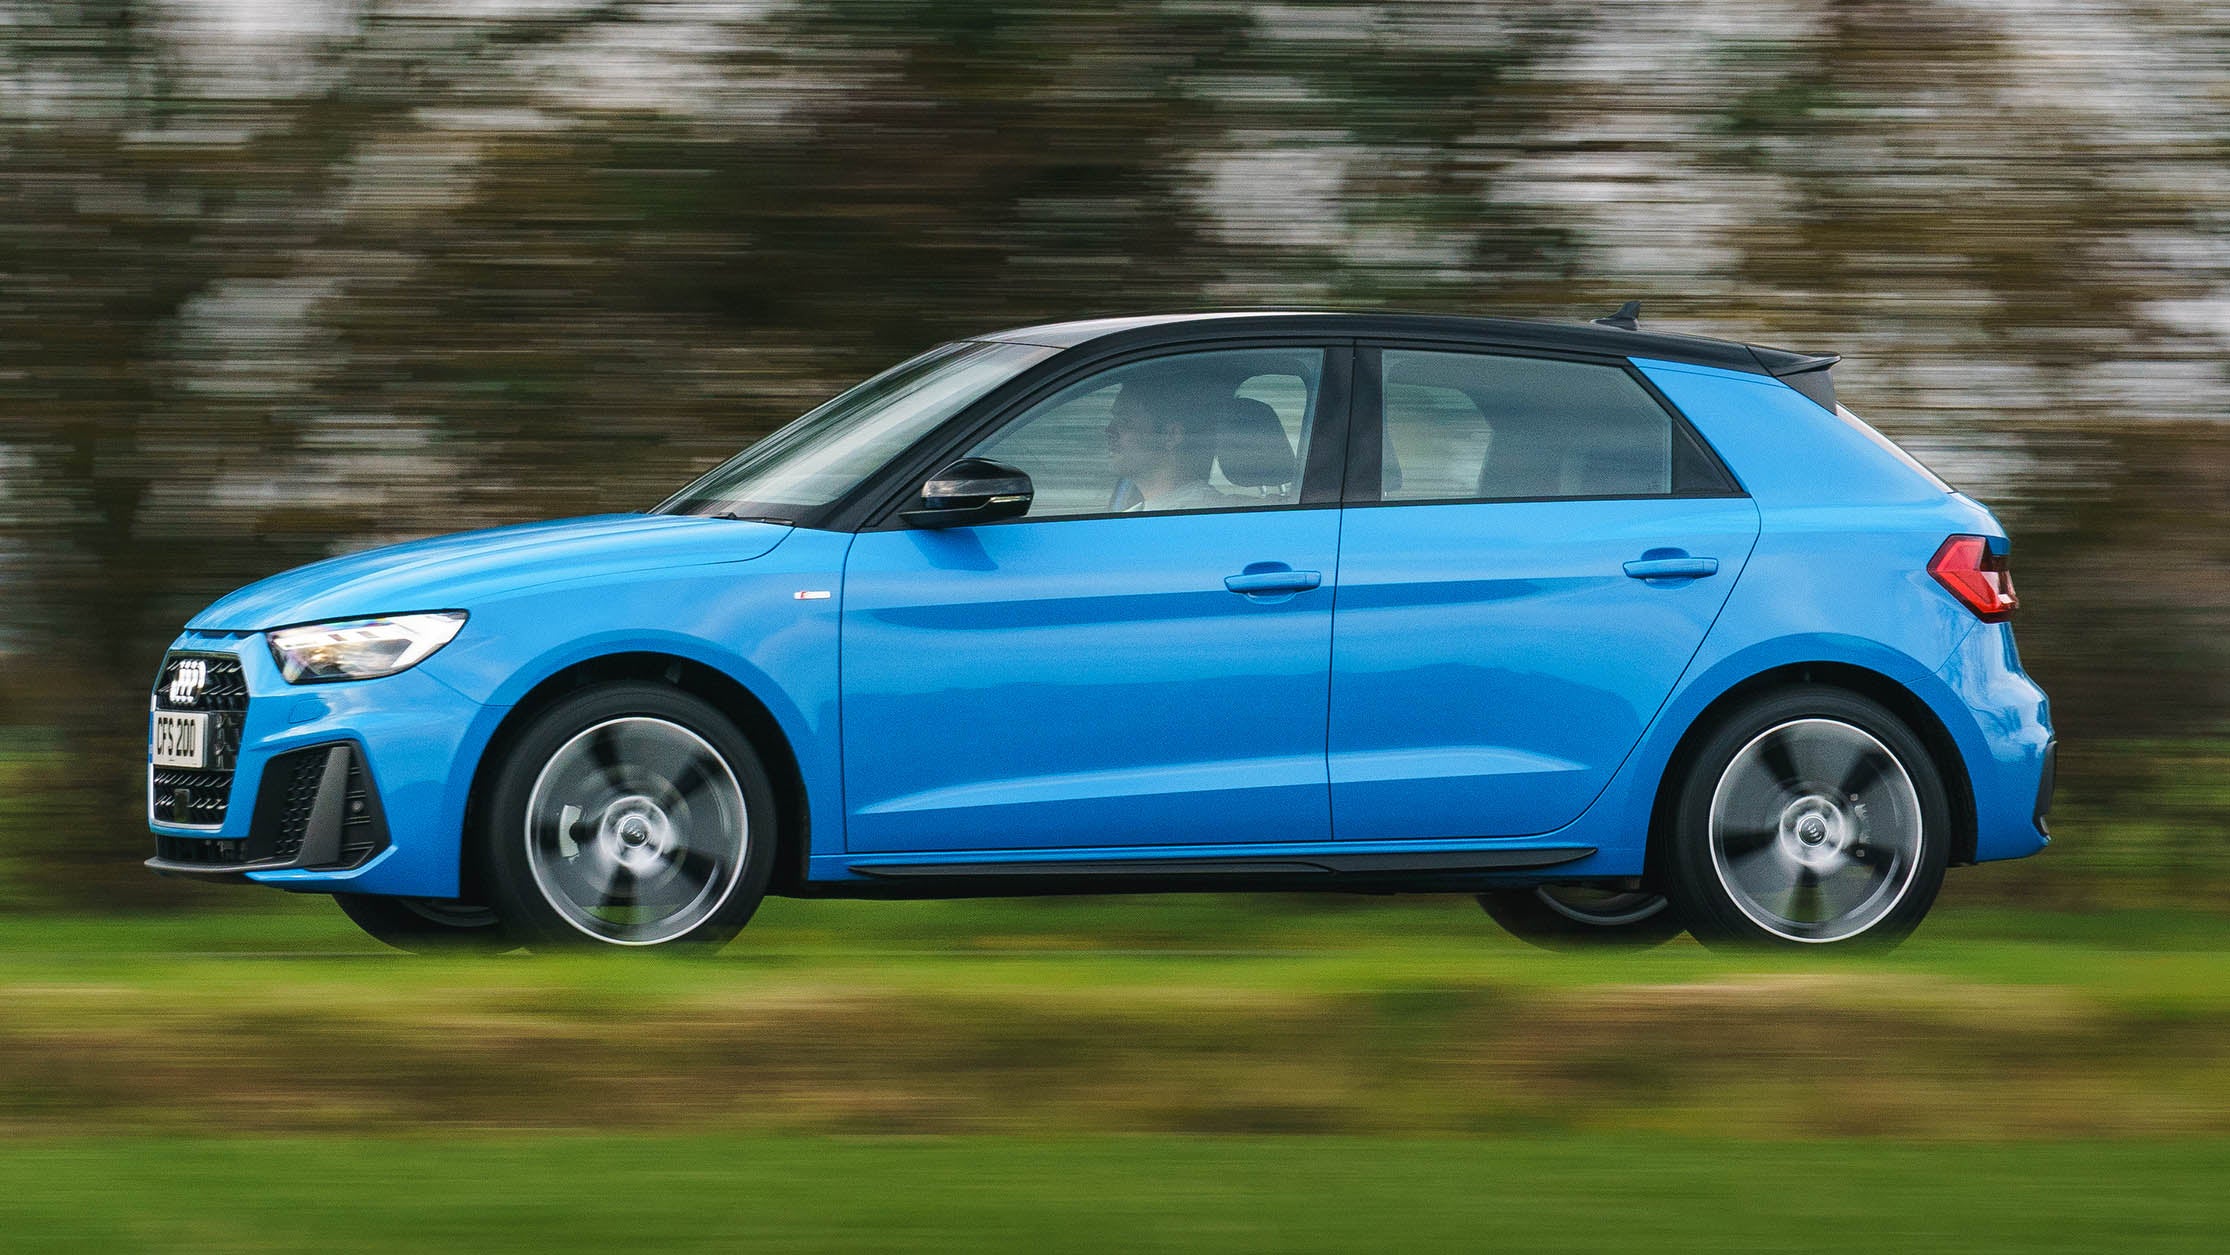 Audi A1 driving side view